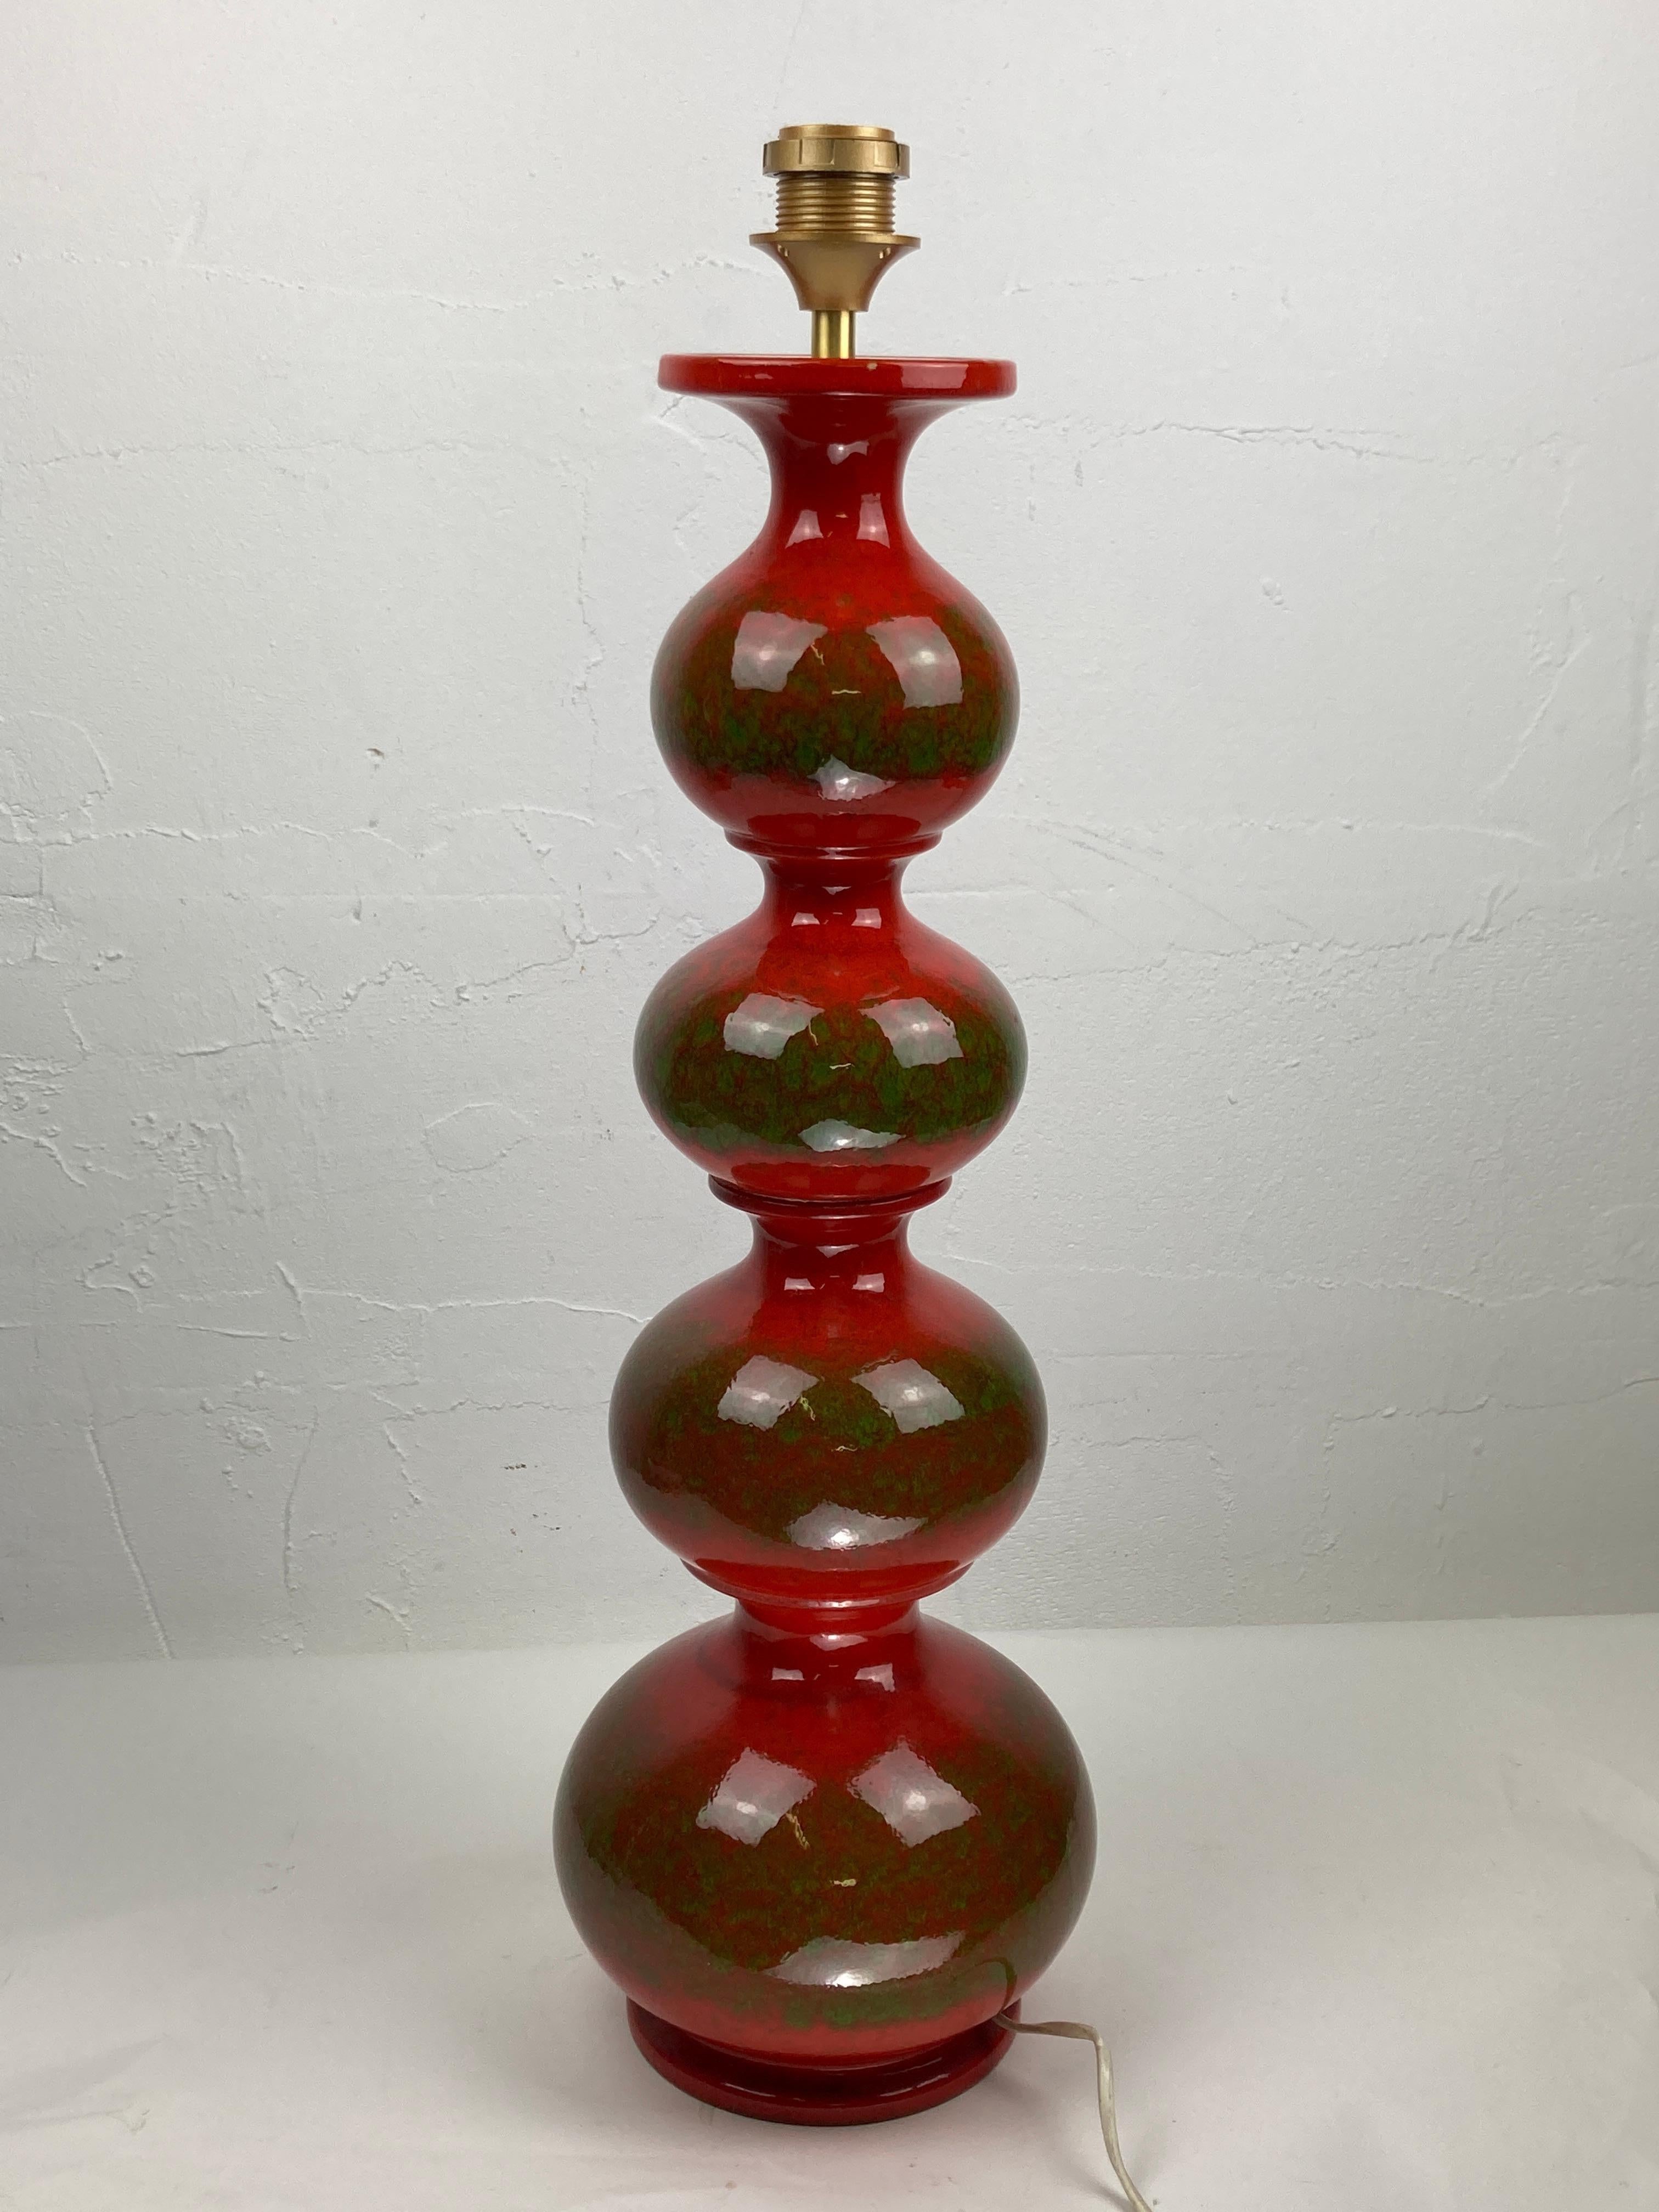 Ceramic bubbly wavy floor or table lamp by Kaiser Leuchten, 1960s For Sale 2